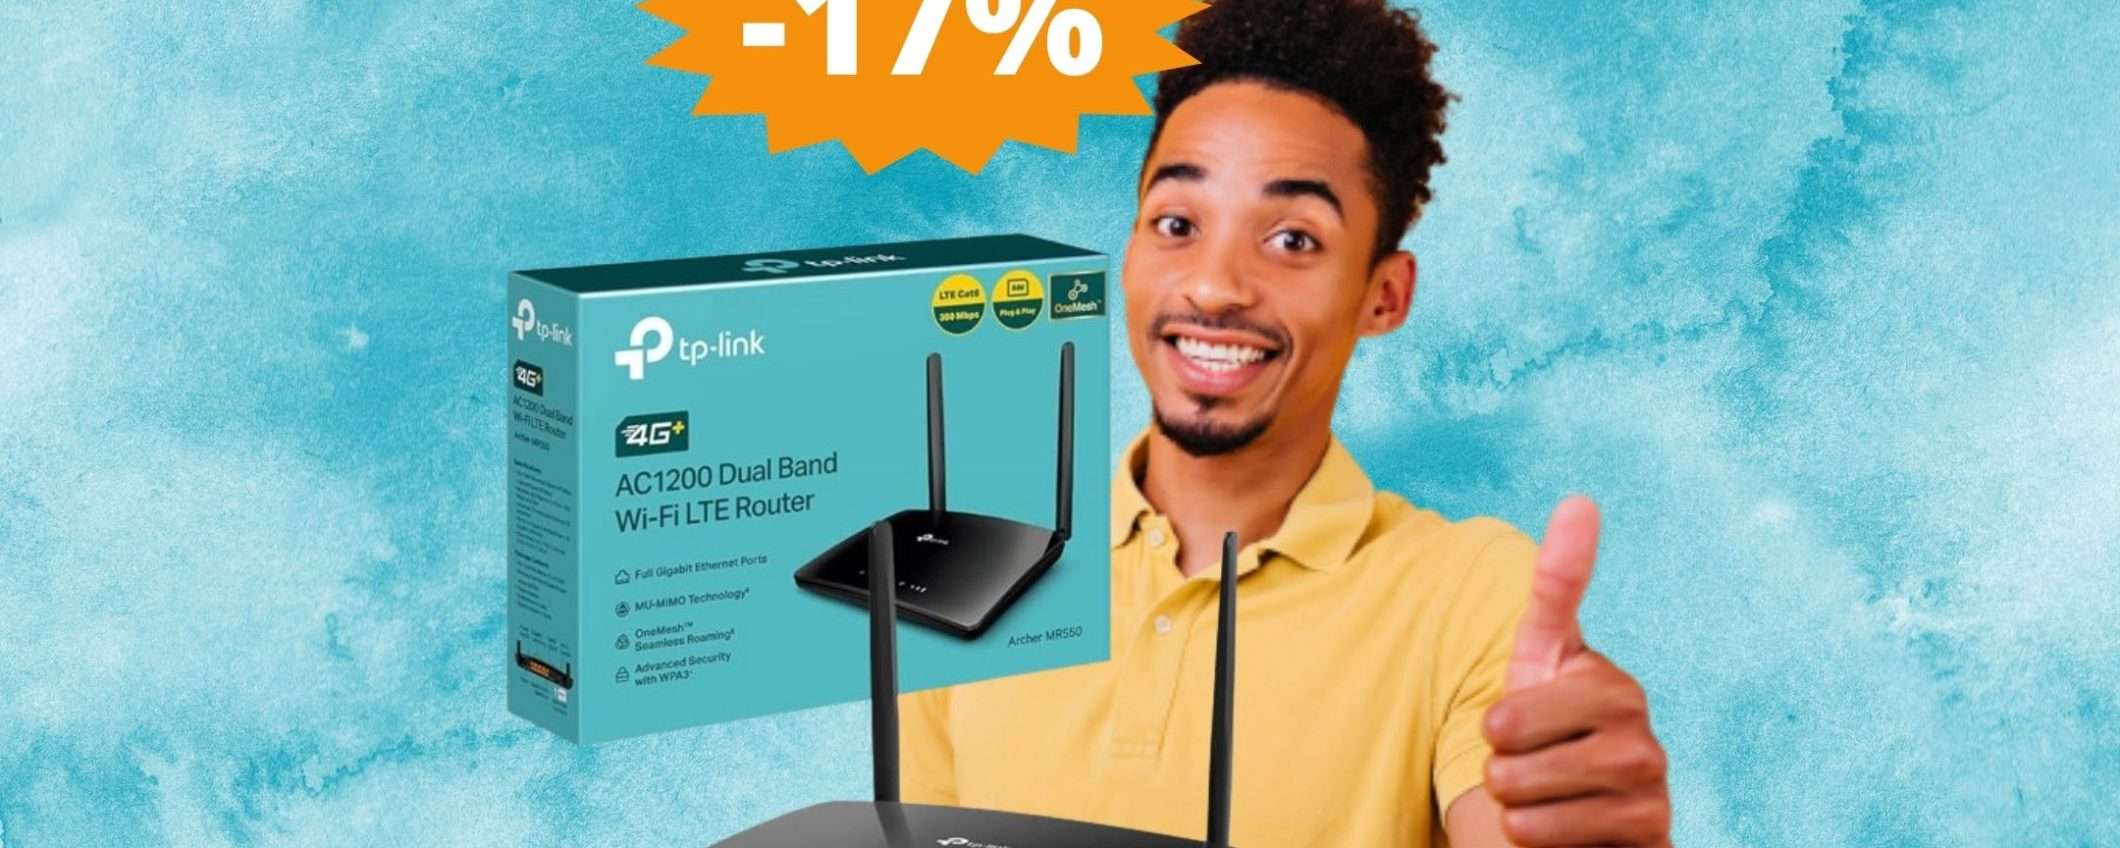 Router TP-Link: ULTIME ORE di questa offerta Black Friday